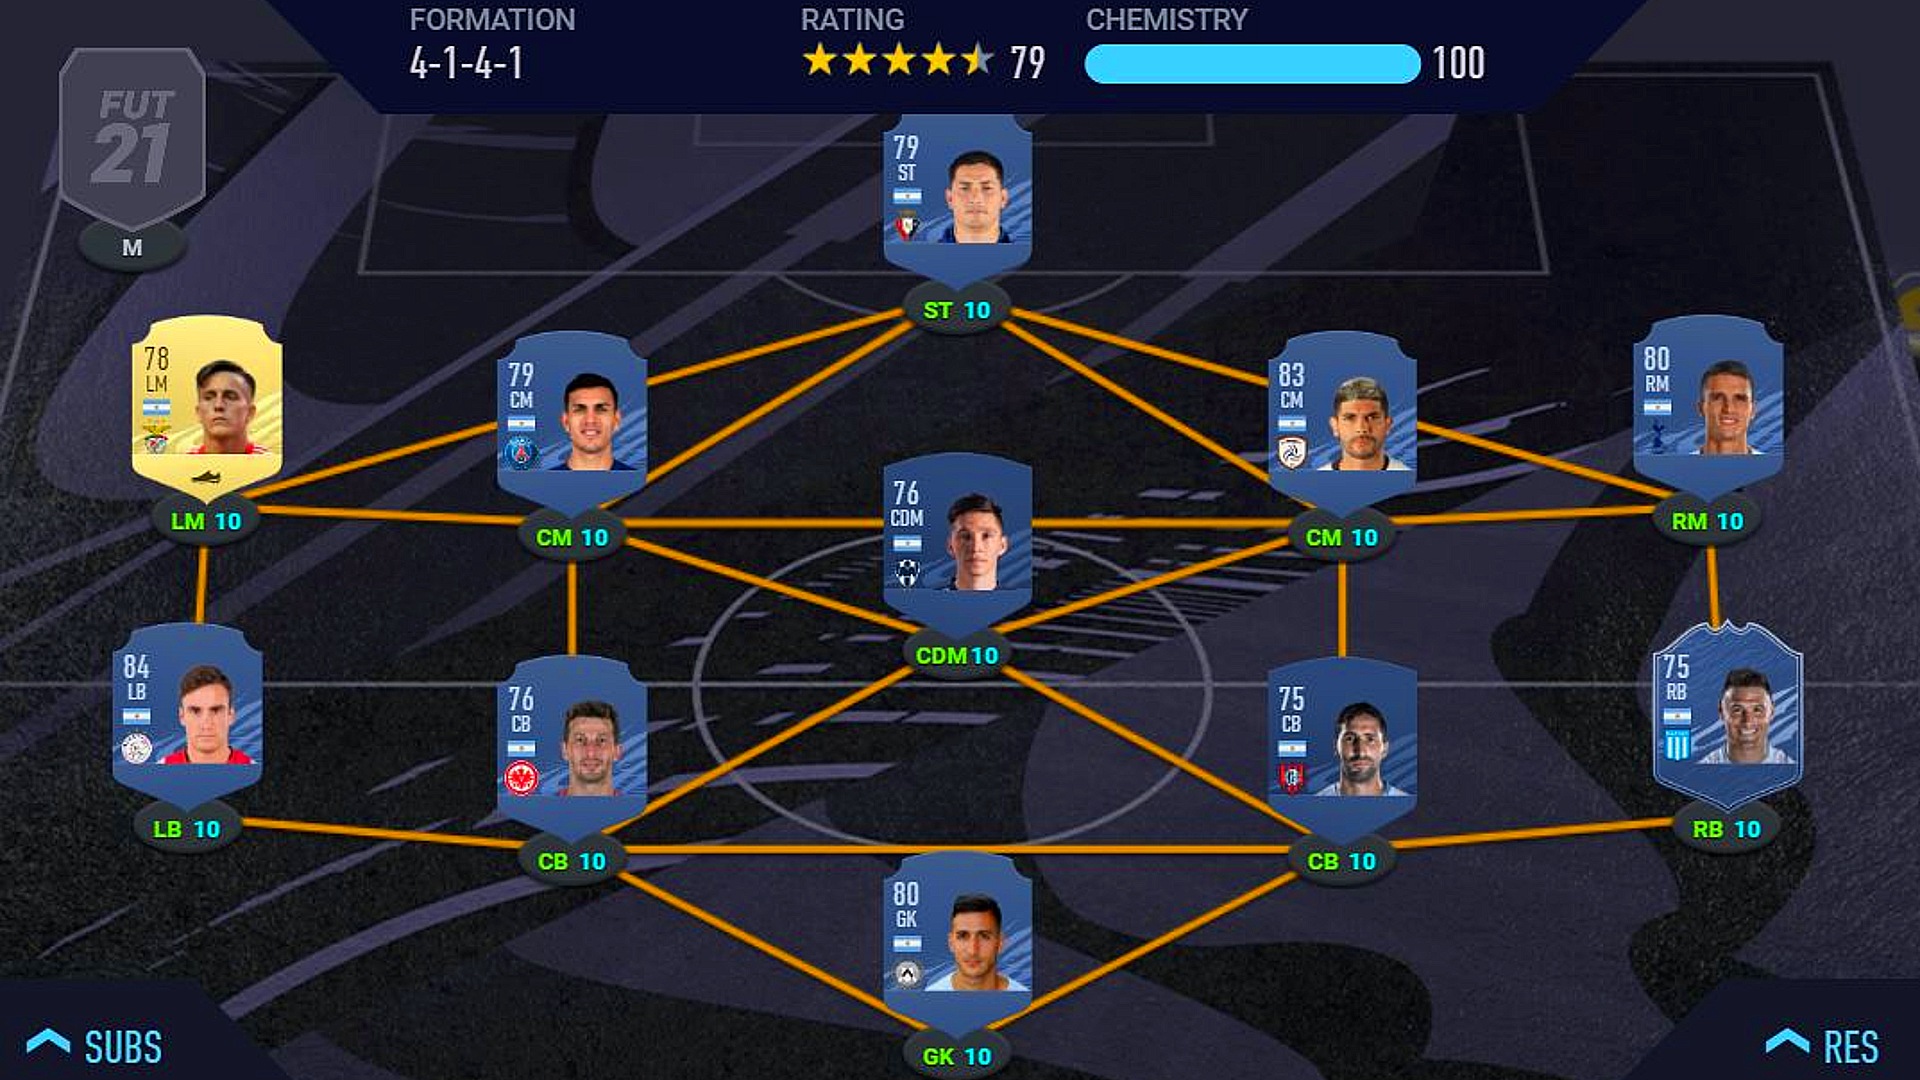 FIFA 21 Hybrid Leagues SBC set: A team setup in the formation menu using Argentinian players.